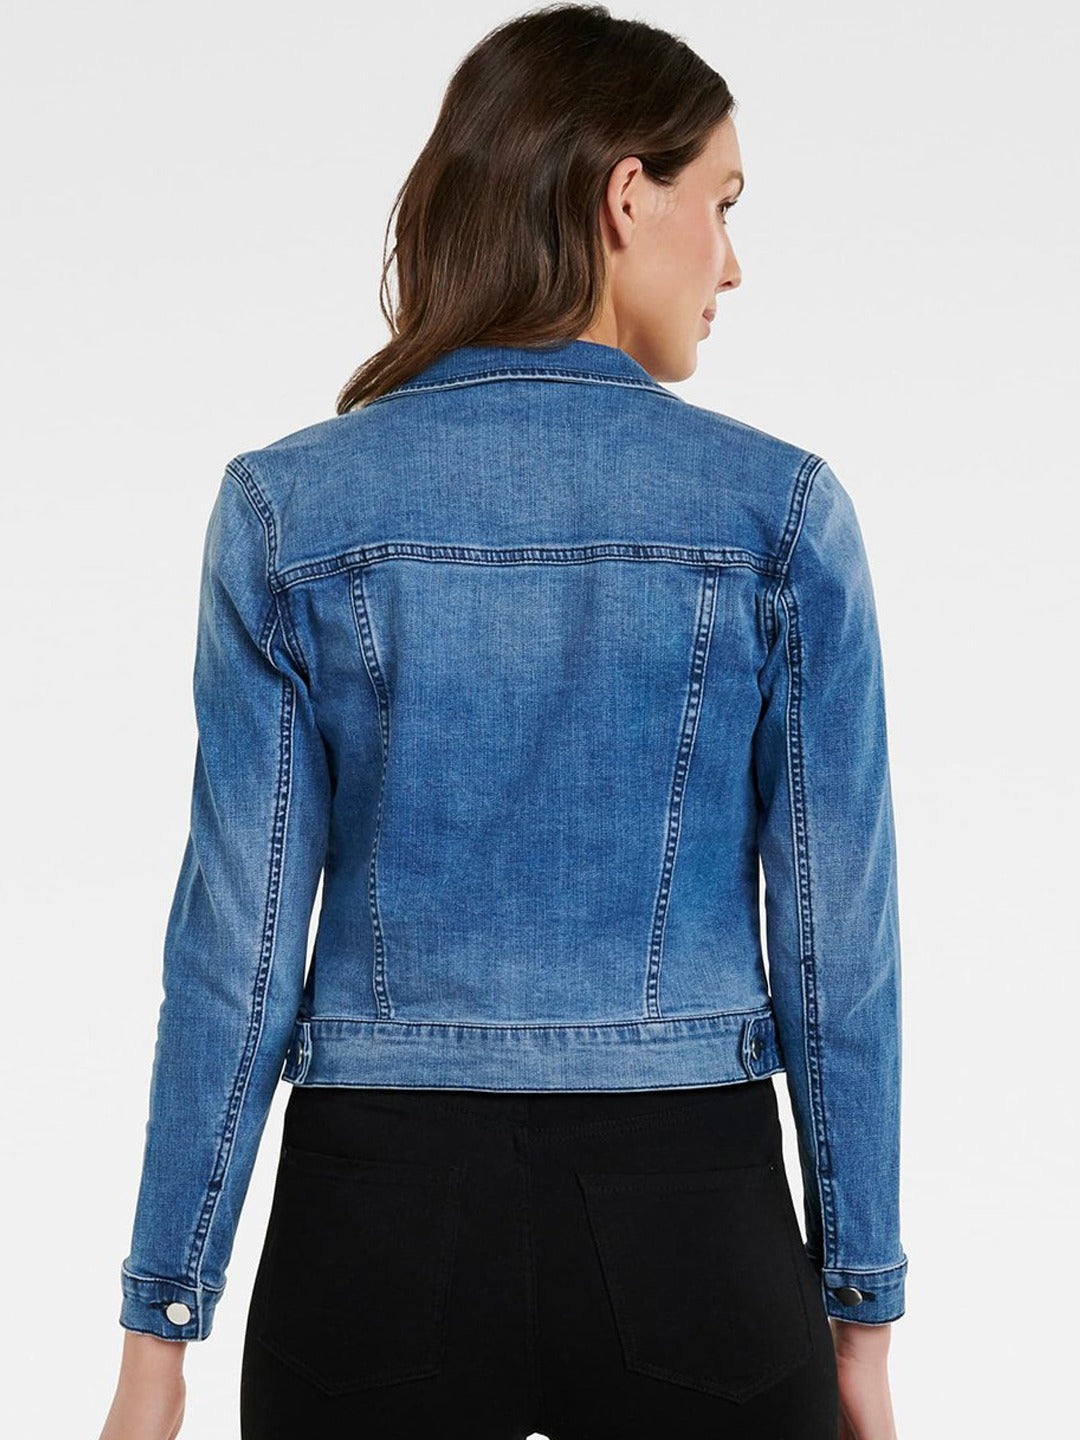 Crisp blue denim jacket with classic jean jacket styling, featuring a tailored fit and long sleeves for a casual yet chic look.